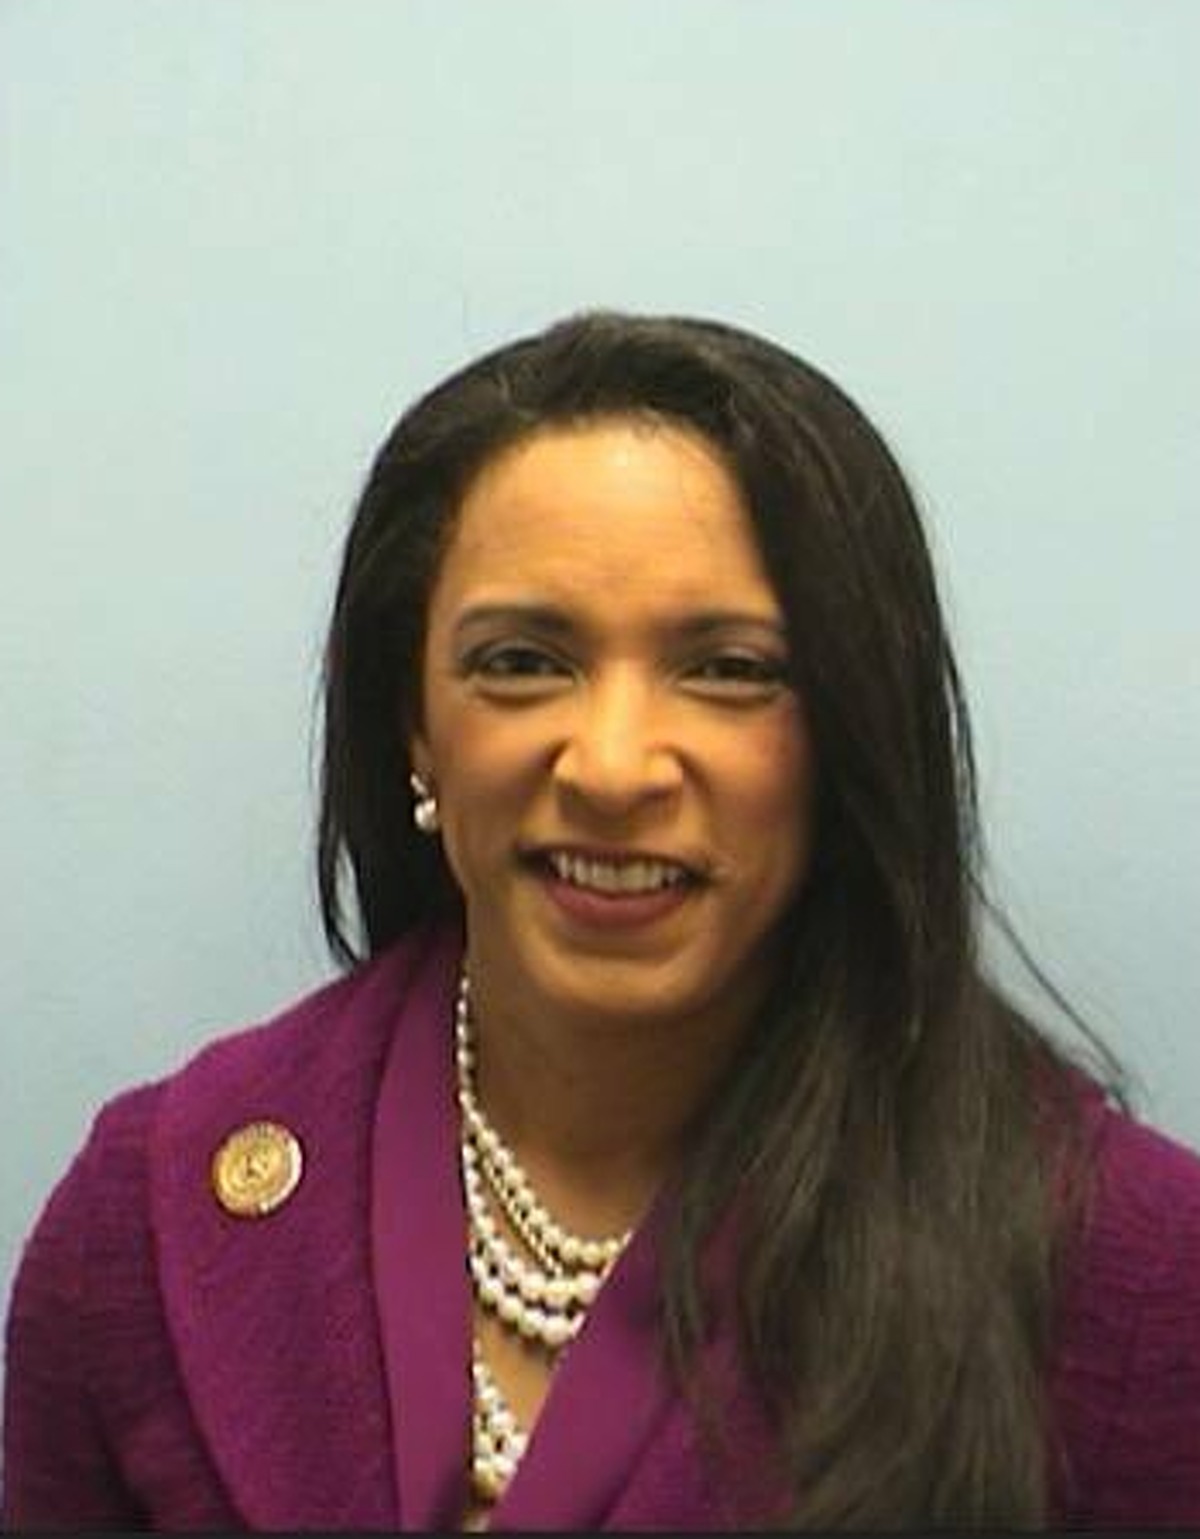 State Rep. Dawnna Dukes, D-Austin, is pictured after being booked on corruption charges in Travis County.